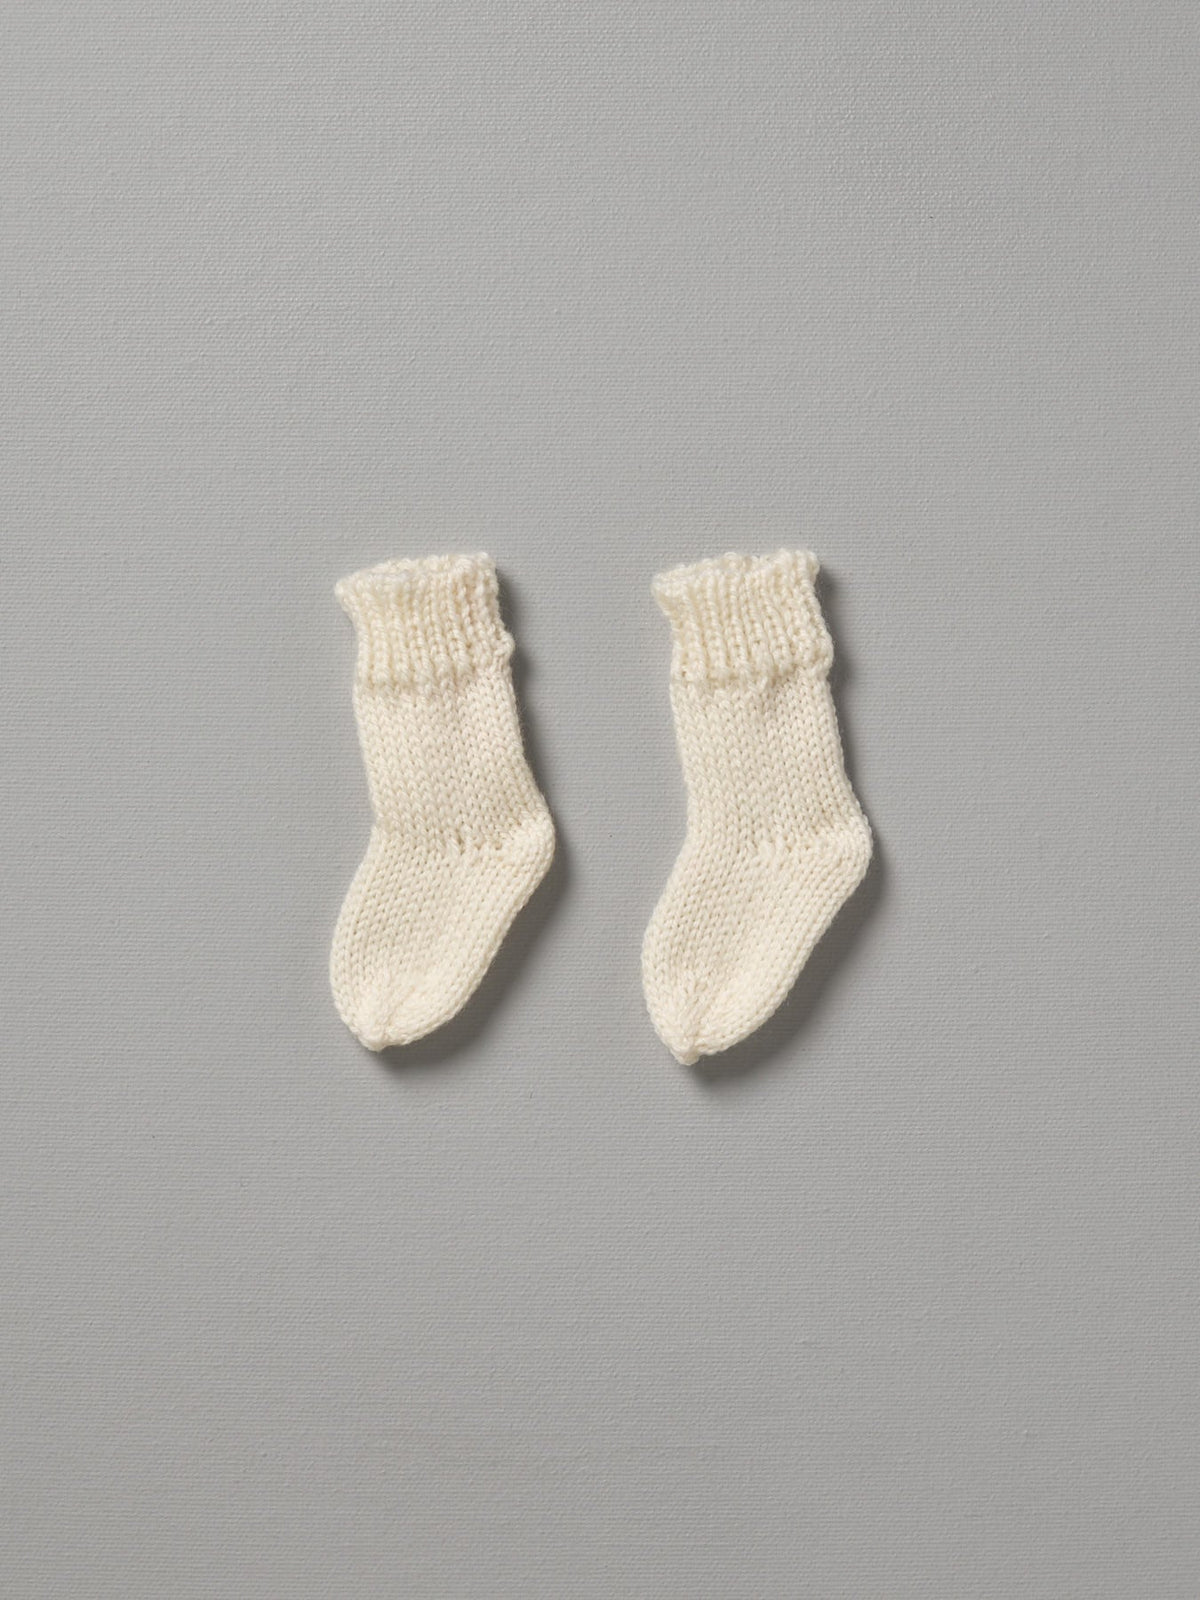 A pair of Weebits Hand Knitted 2ply Merino Socks - Ivory on a grey background.